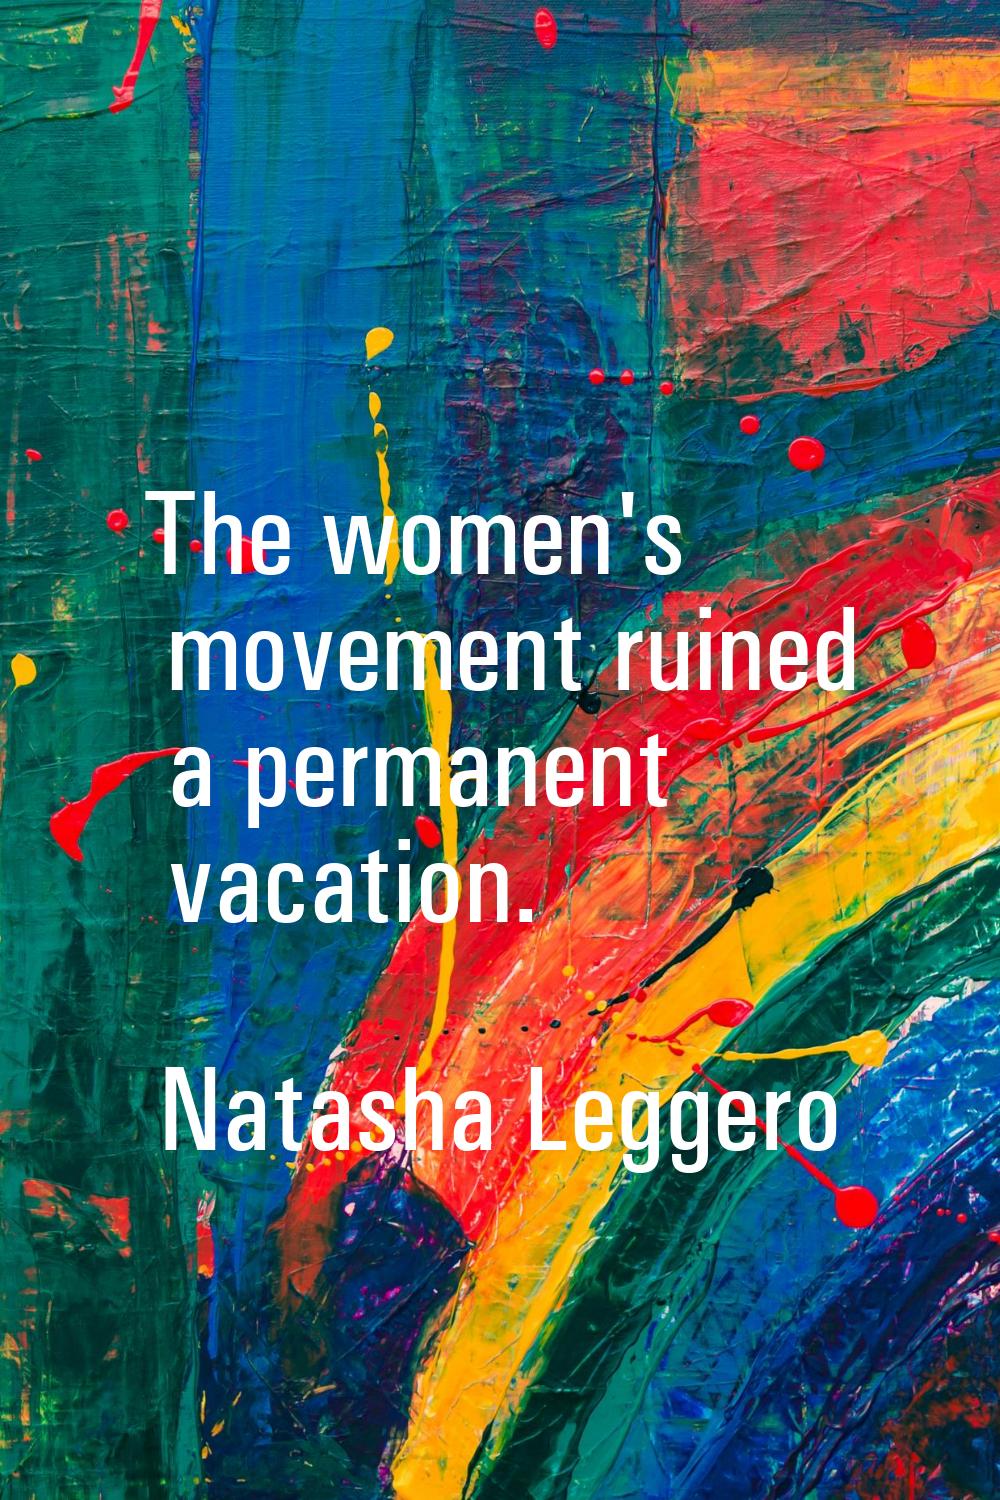 The women's movement ruined a permanent vacation.